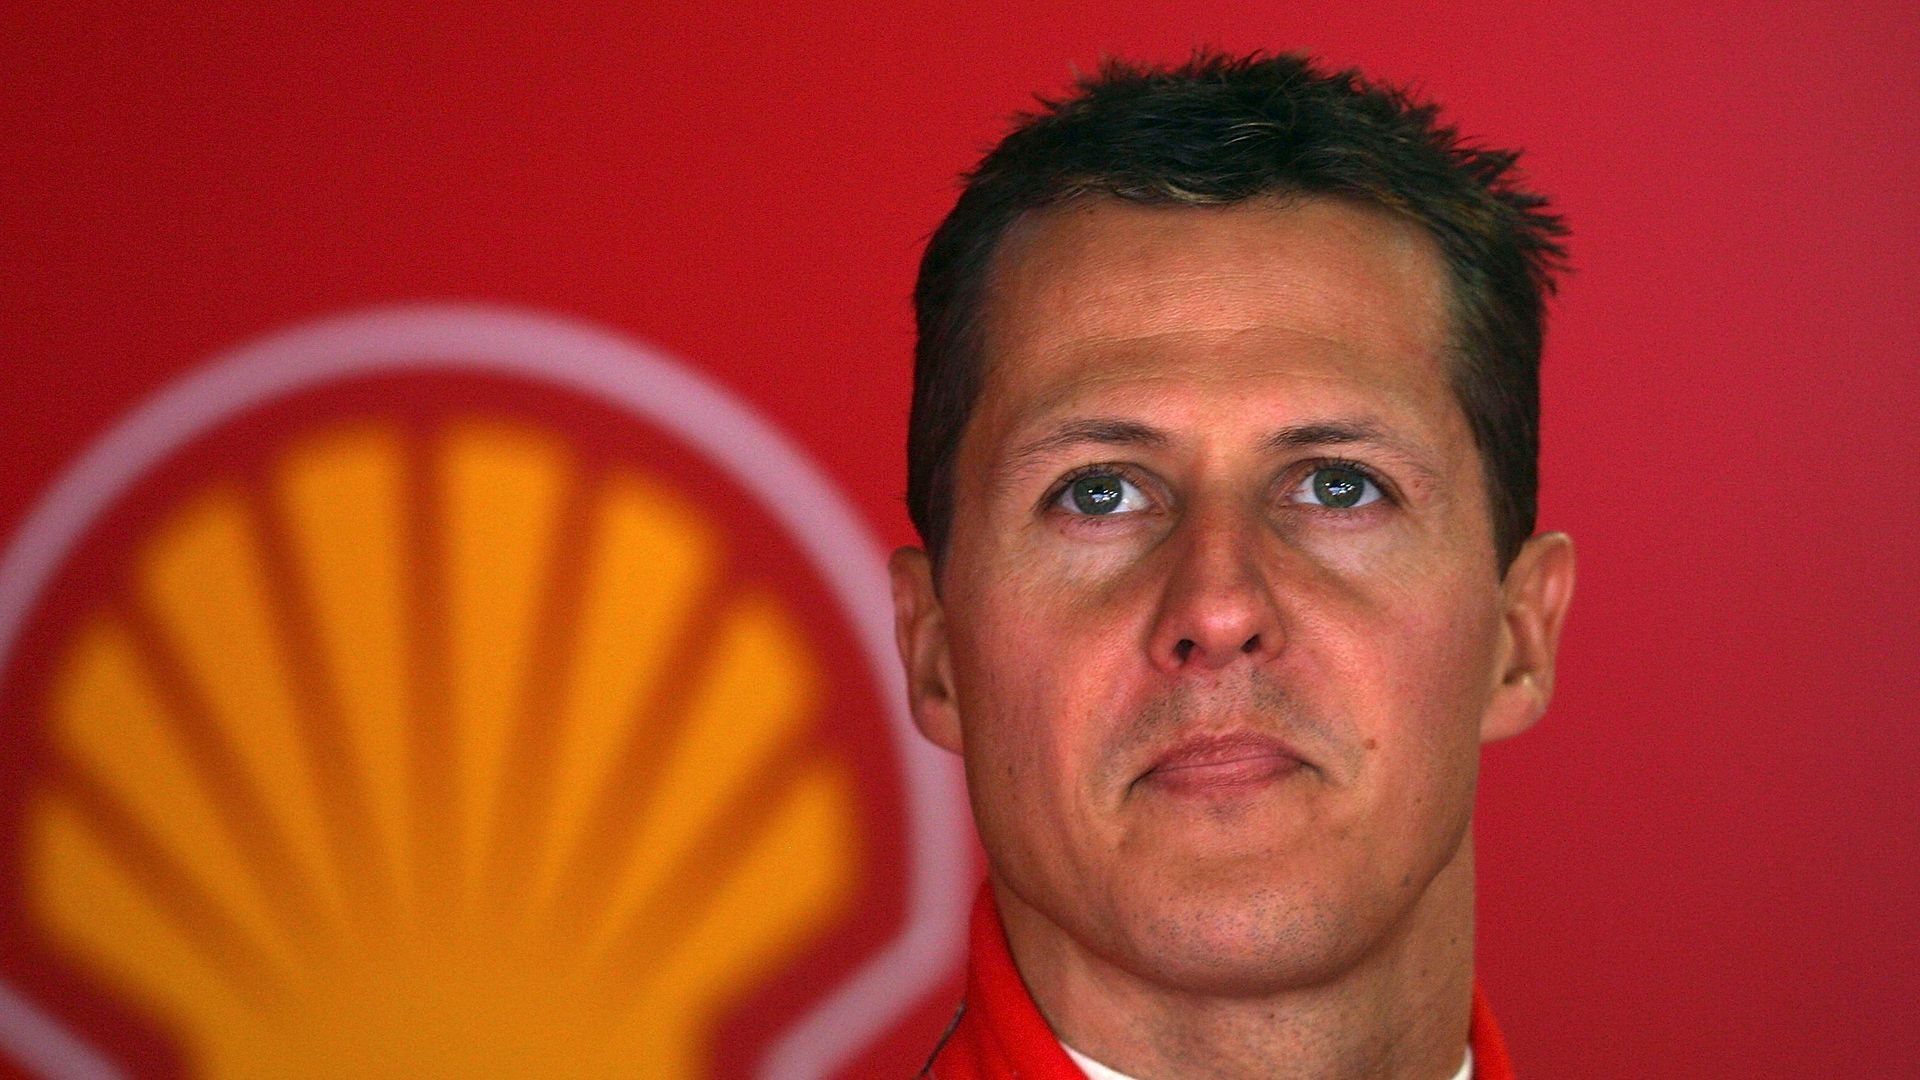 Michael Schumacher of Germany and Ferrari looks on in the Ferrari pit during the qualifying session for the Monaco Formula One Grand Prix on May 22, 2005 in Monte Carlo, Monaco